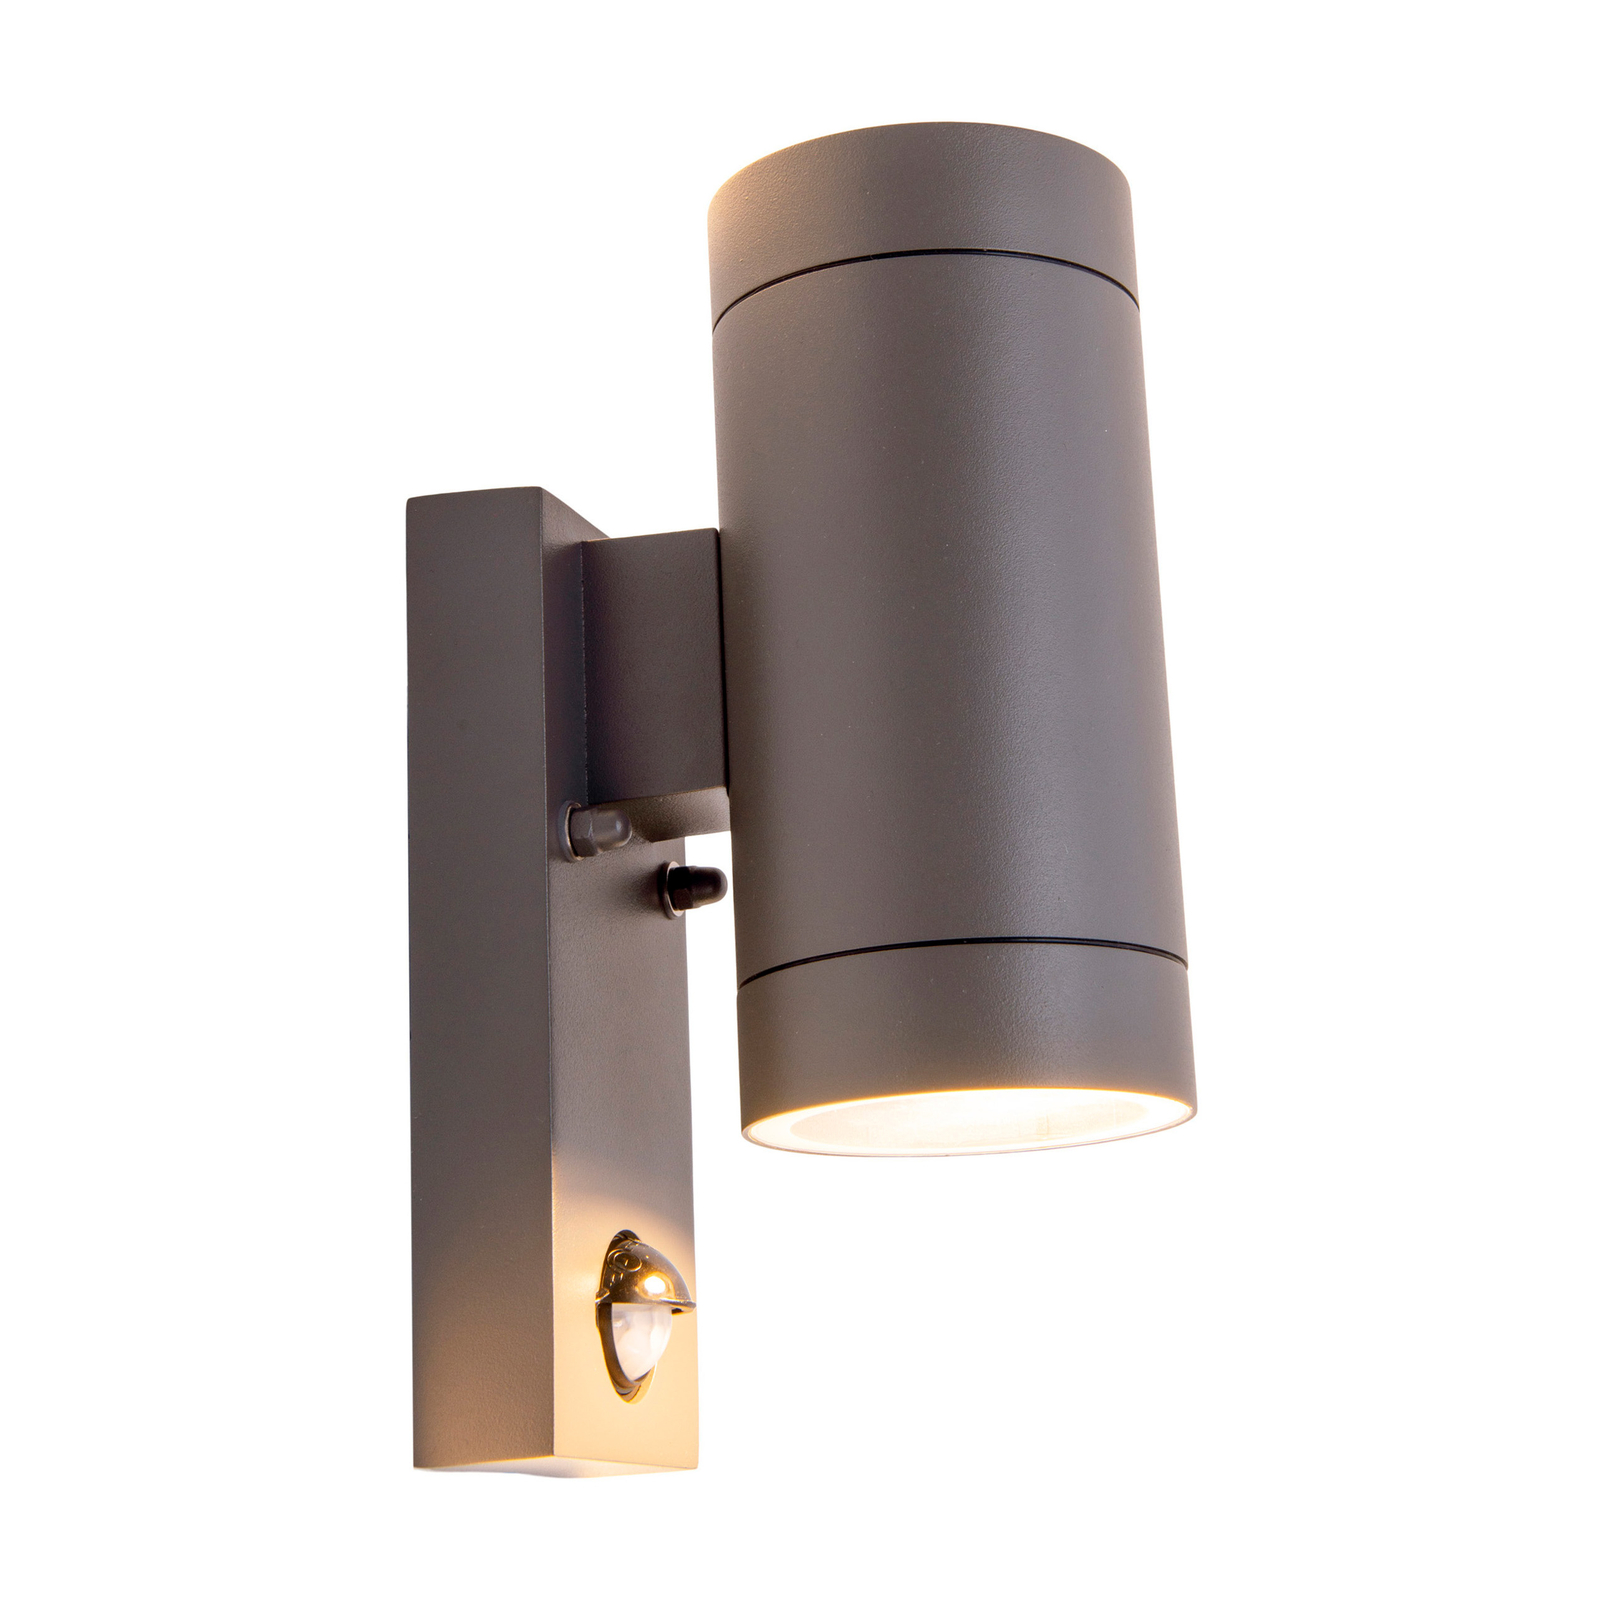 Rombe outdoor wall light with a sensor, 2-bulb